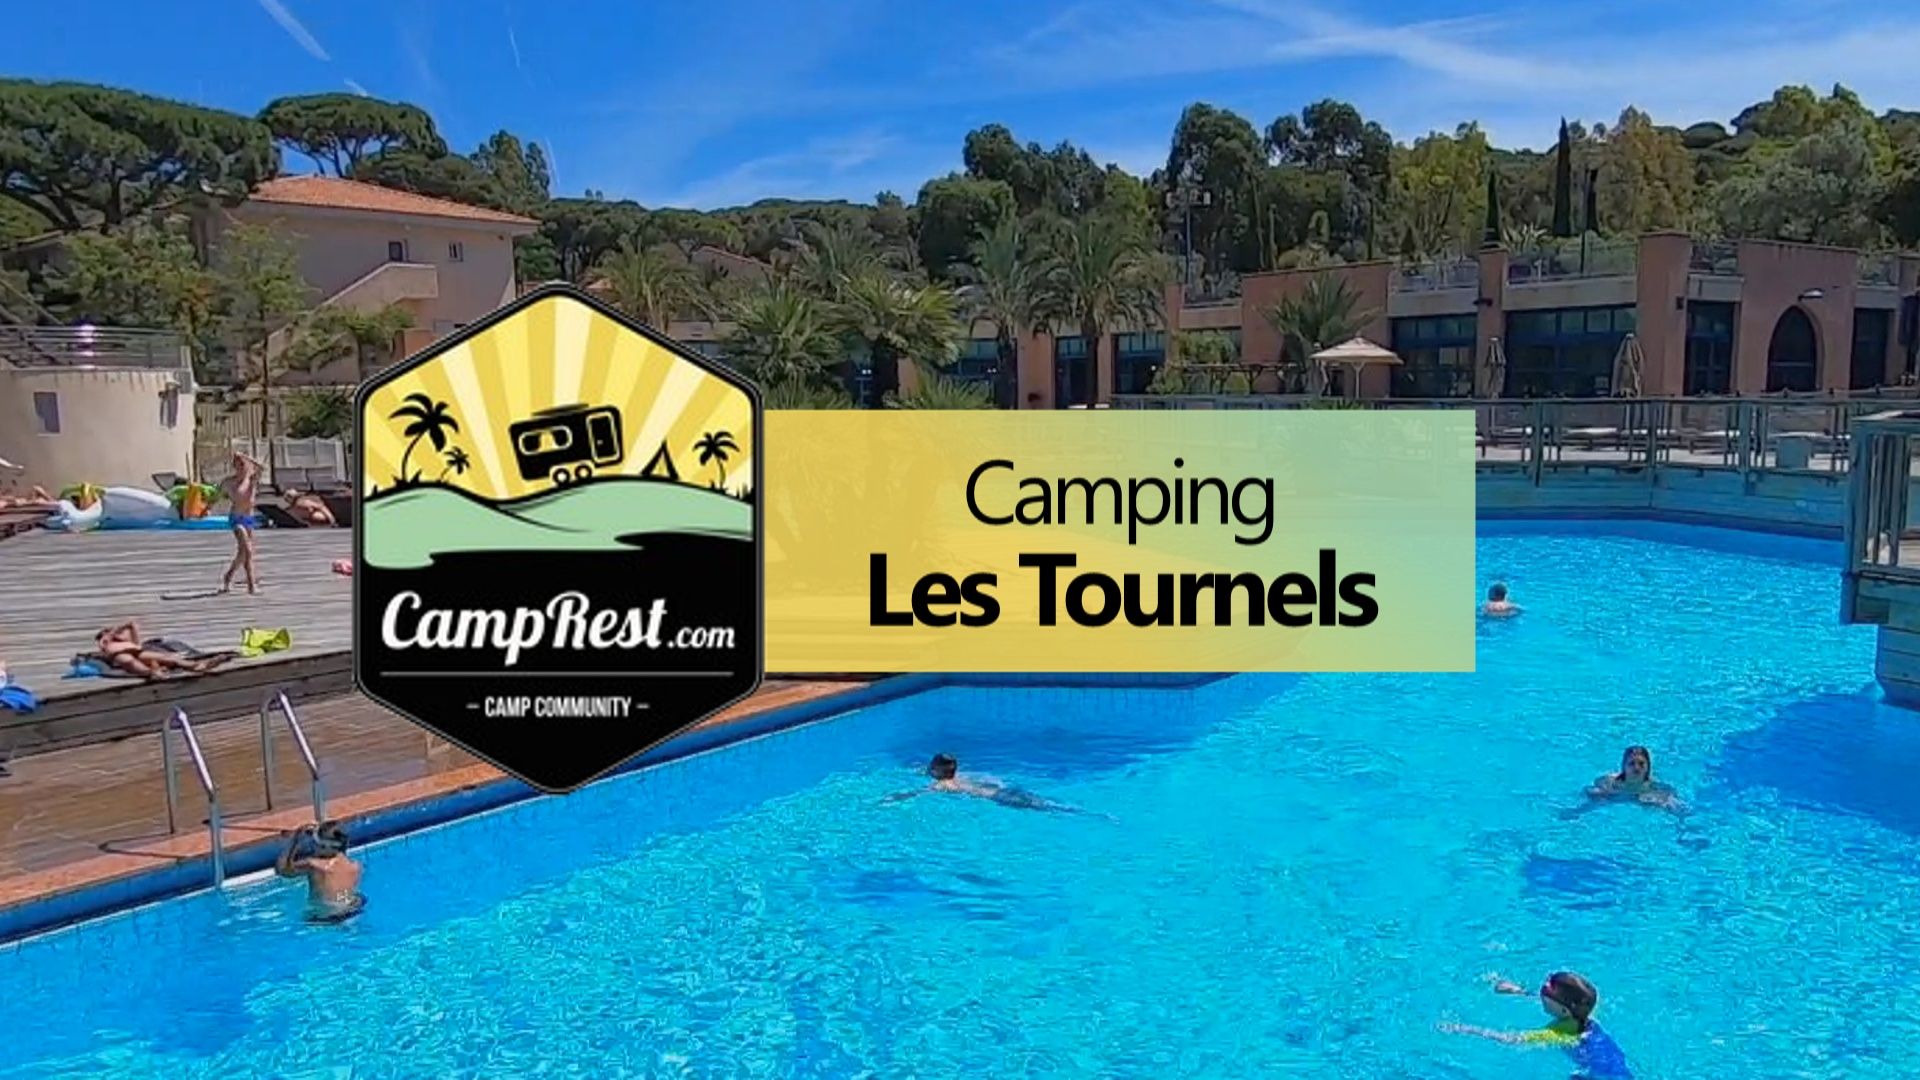 A very nice campsite in France - Les Tournels – main image